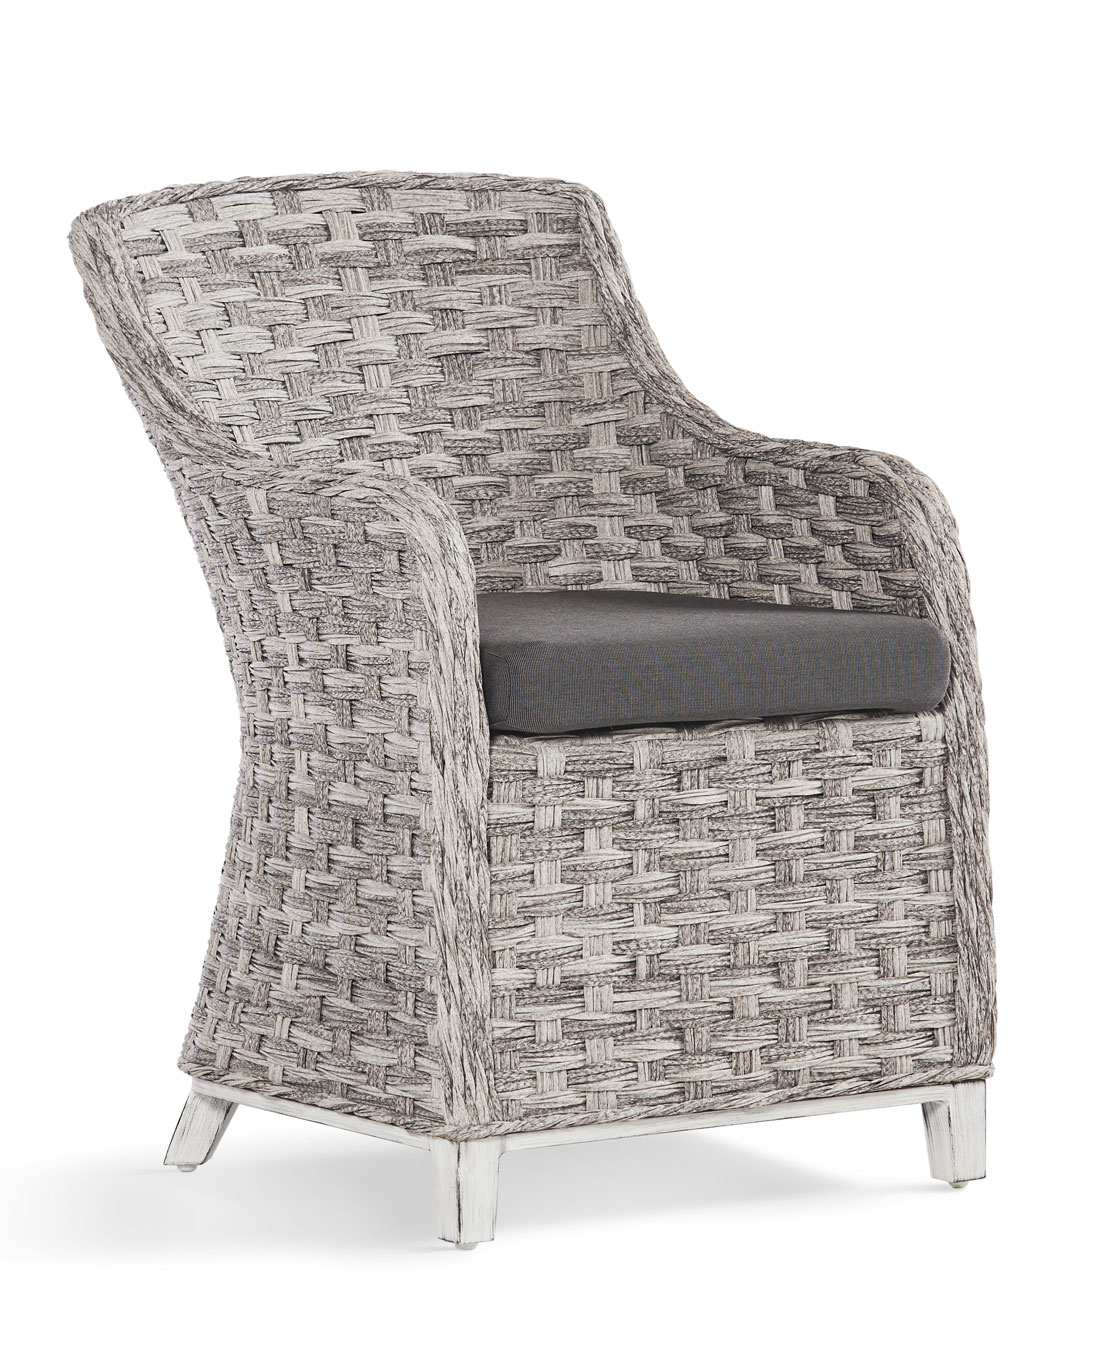 Canyon Lake Resin Wicker Dining Arm Chair  Min (2)